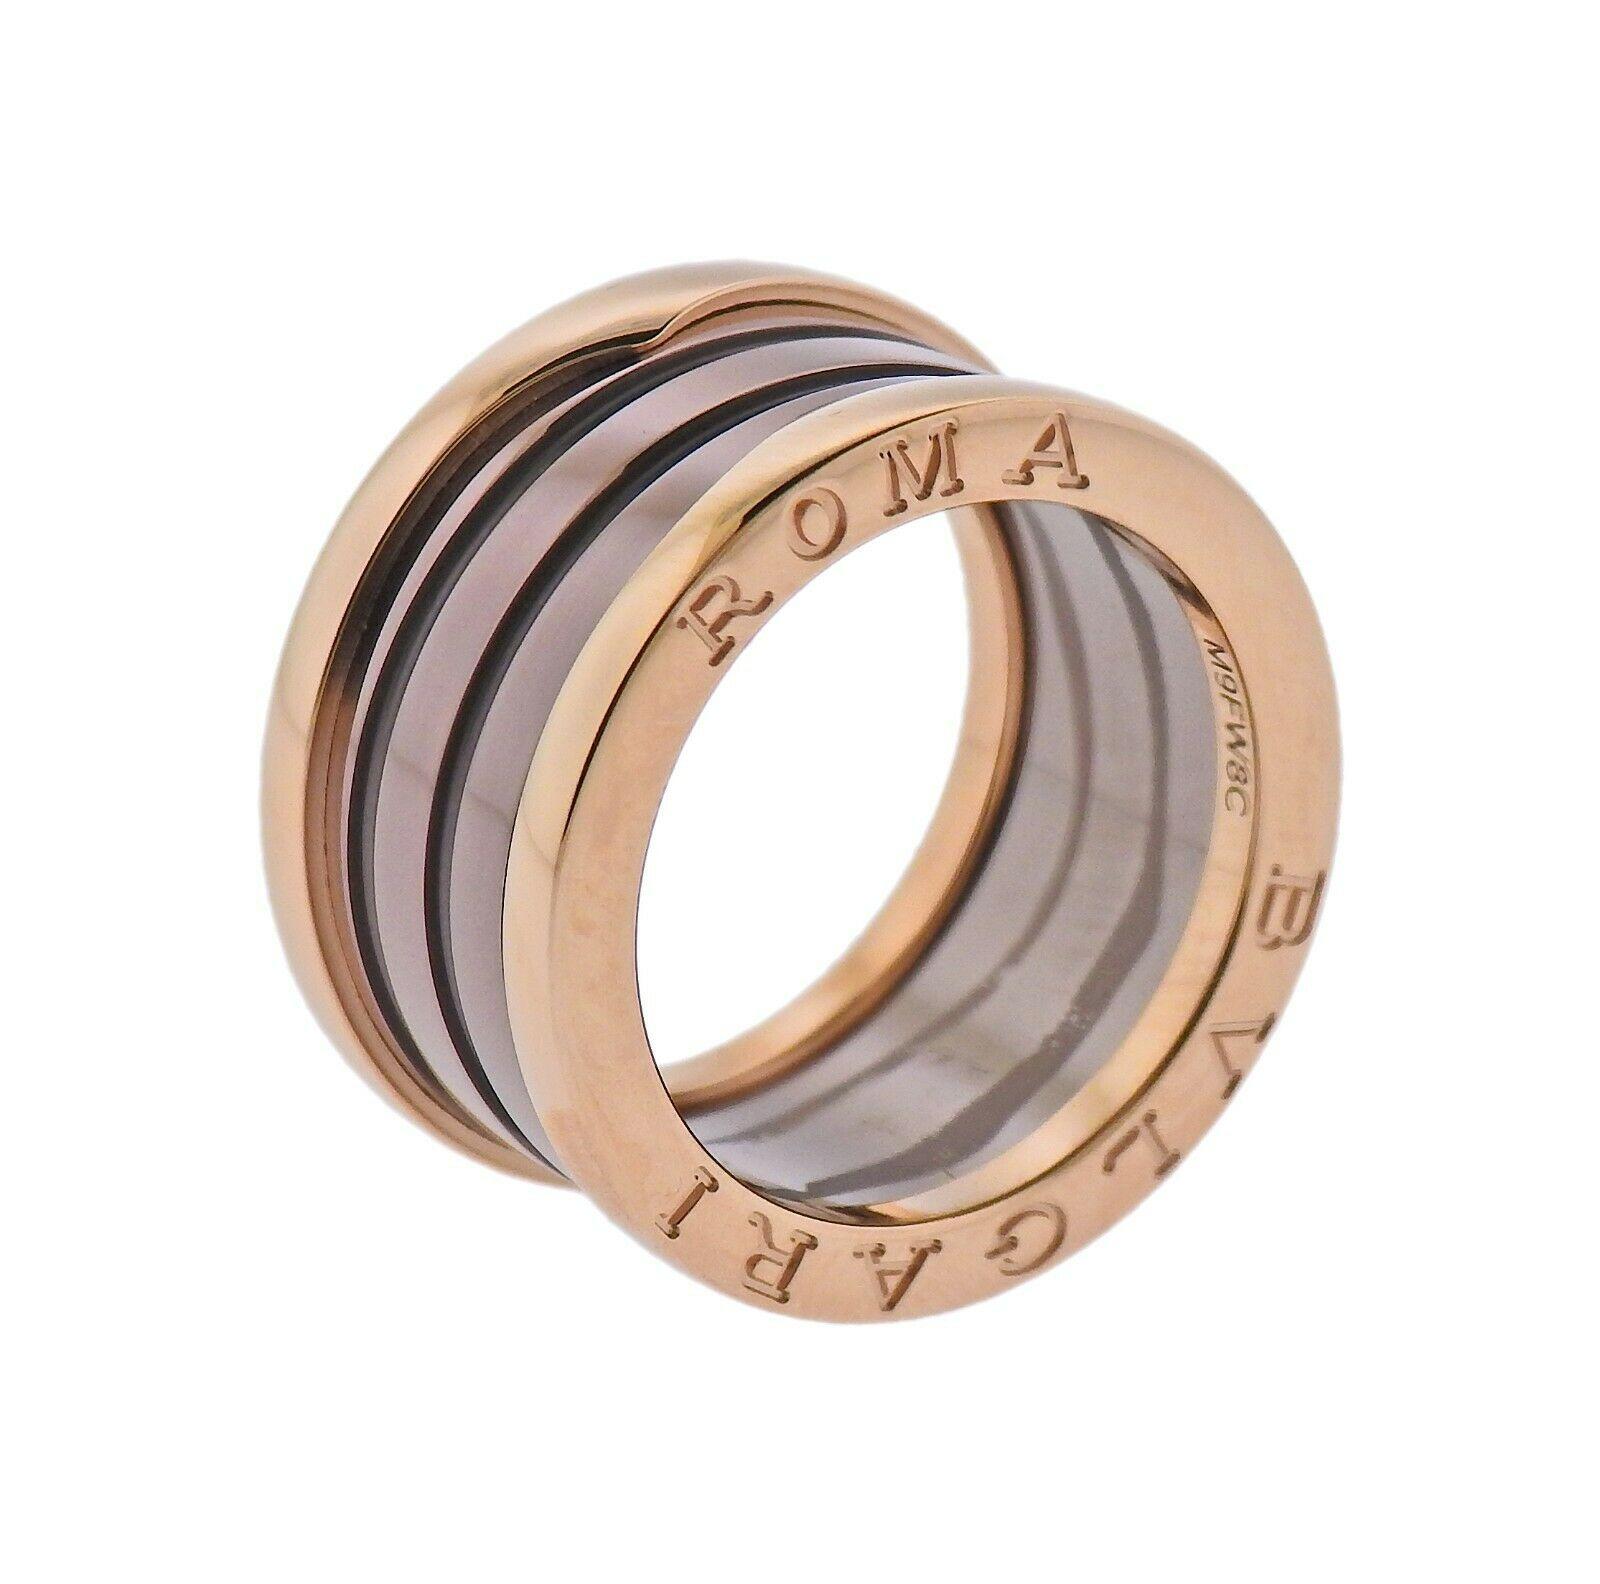 New 18k rose gold and bronze ceramic B.Zero1 band ring by Bvlgari, in size 54.  Size 6 1/2', EU size 54, 12mm wide . Marked: Bvlgari, Roma, M9FW8C, Made in Italy, 750 . Weight - 9.5 grams. 